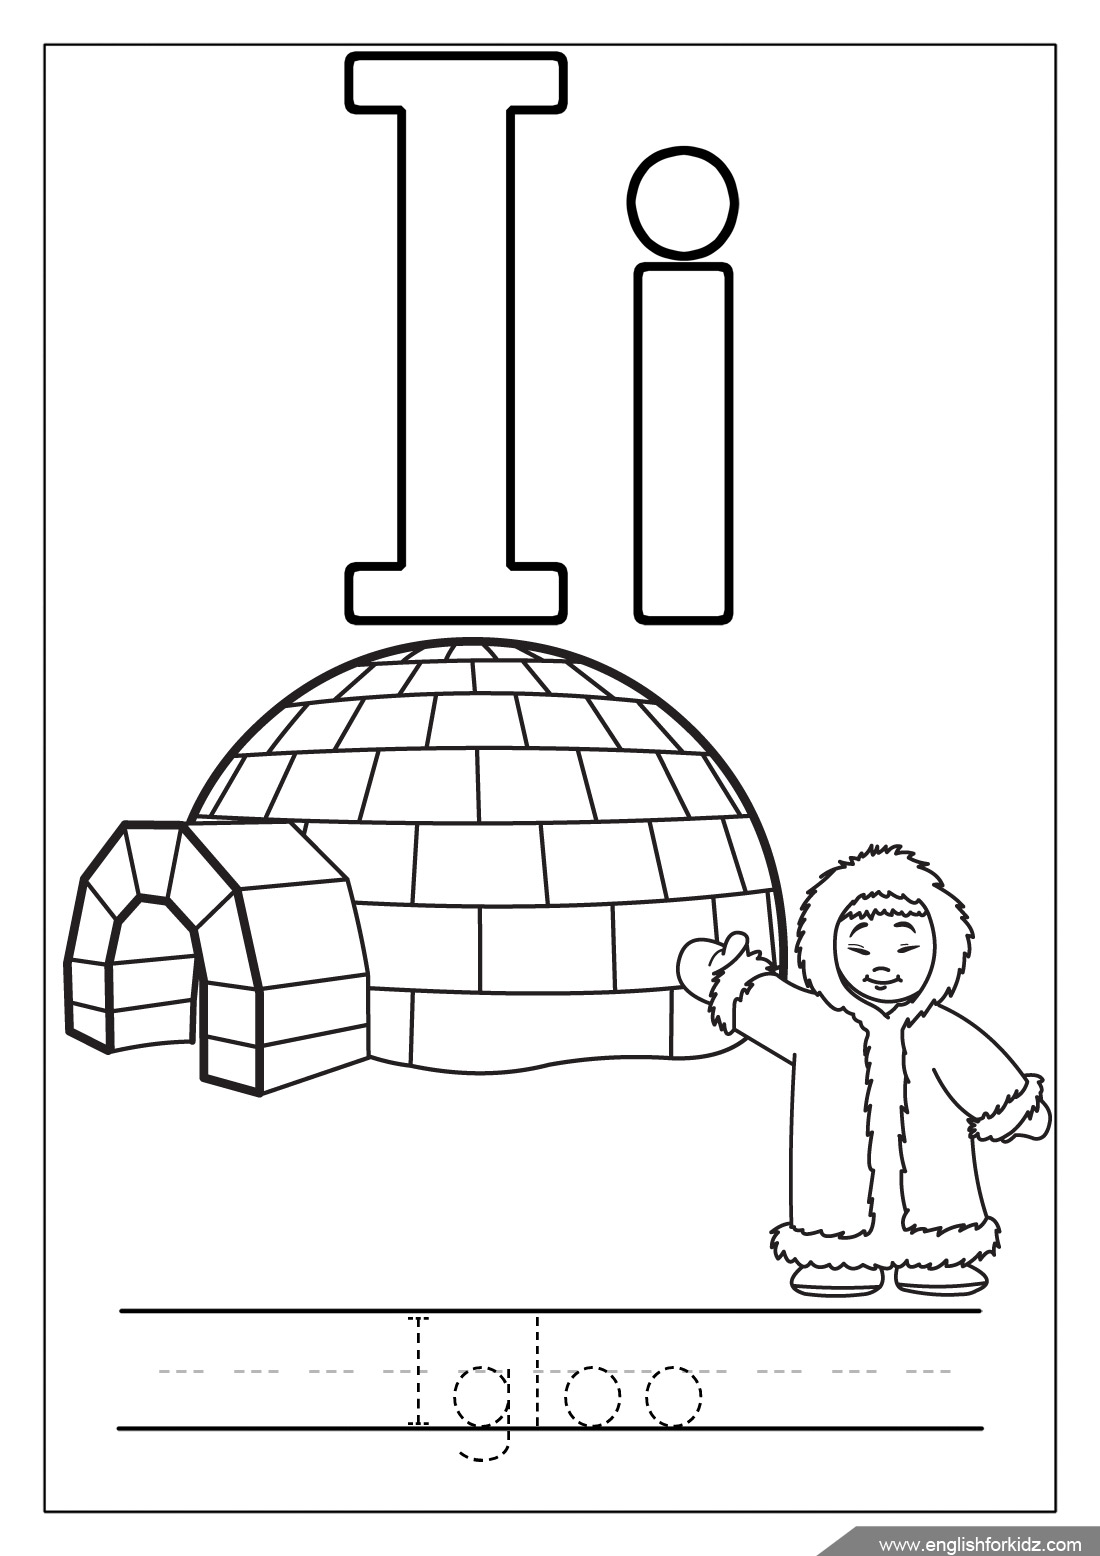 Igloo Coloring Pages